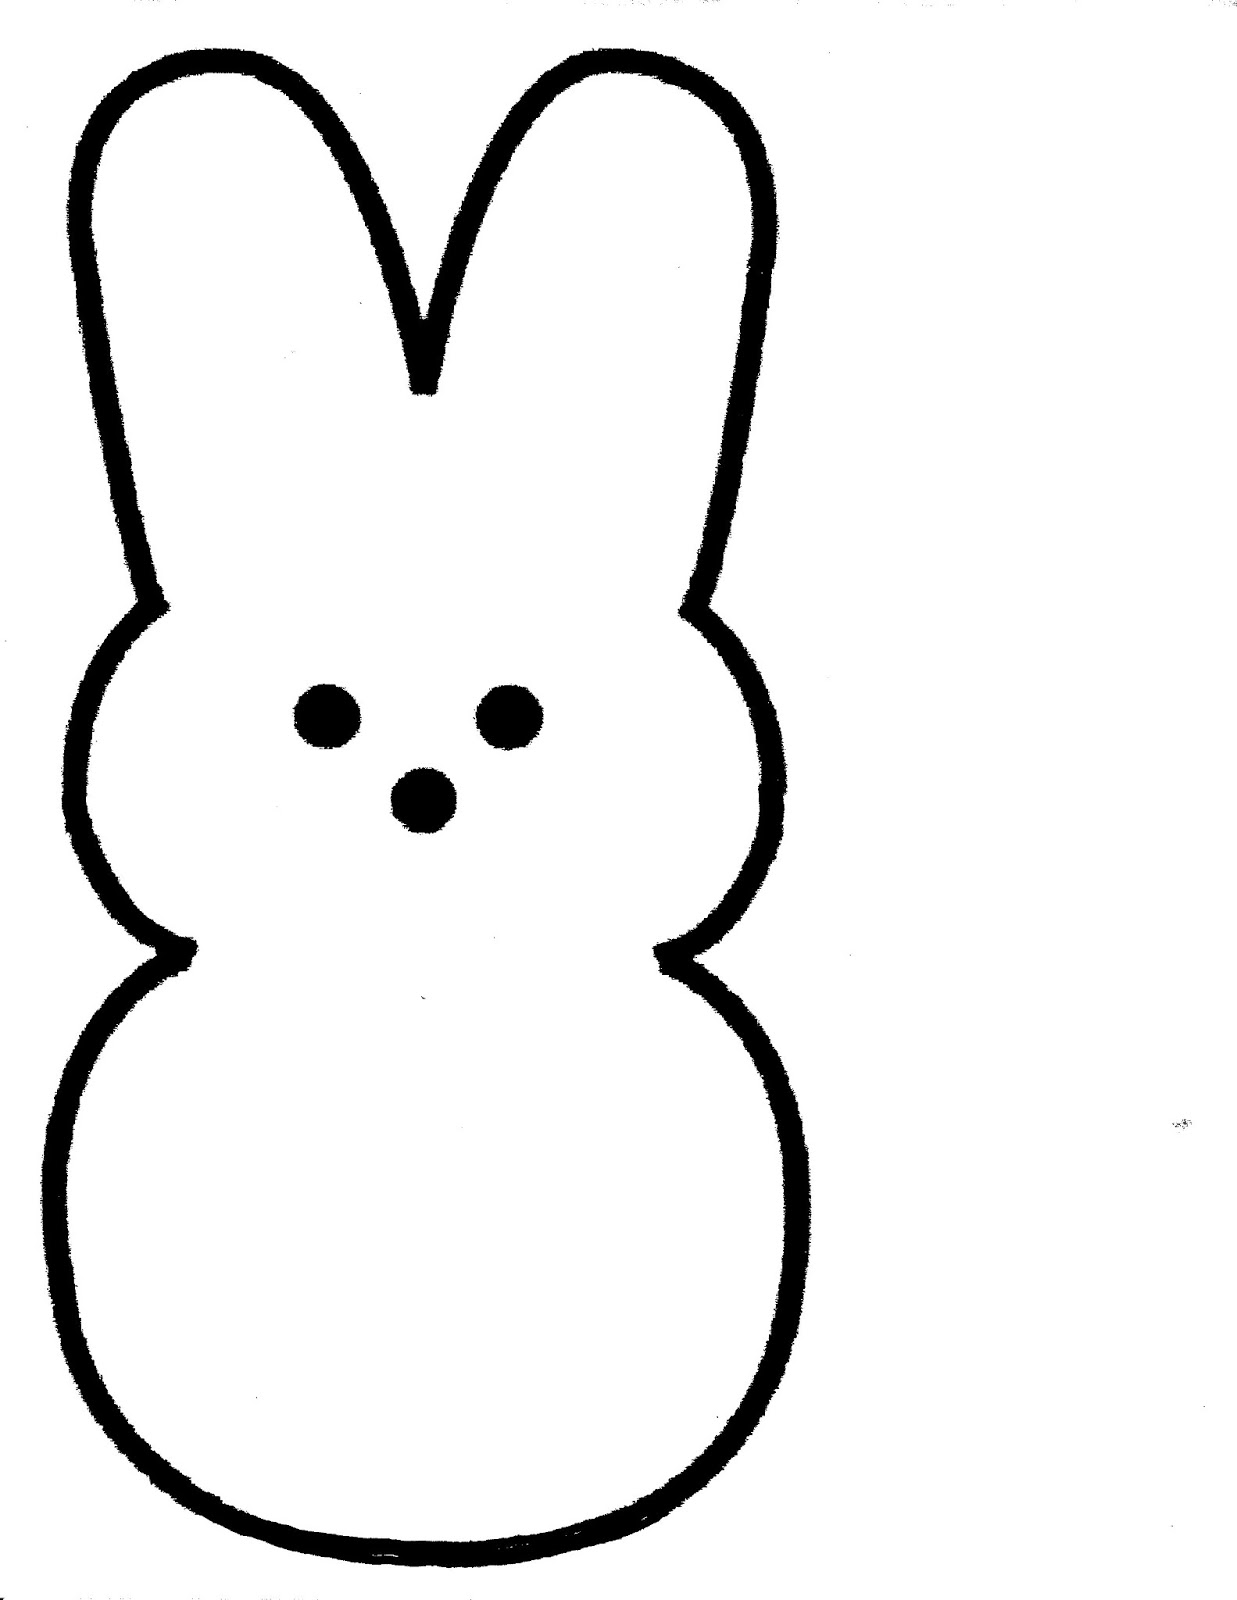 Clip Arts Related To : silhouette bunny image clipart. view all peeps-clipa...